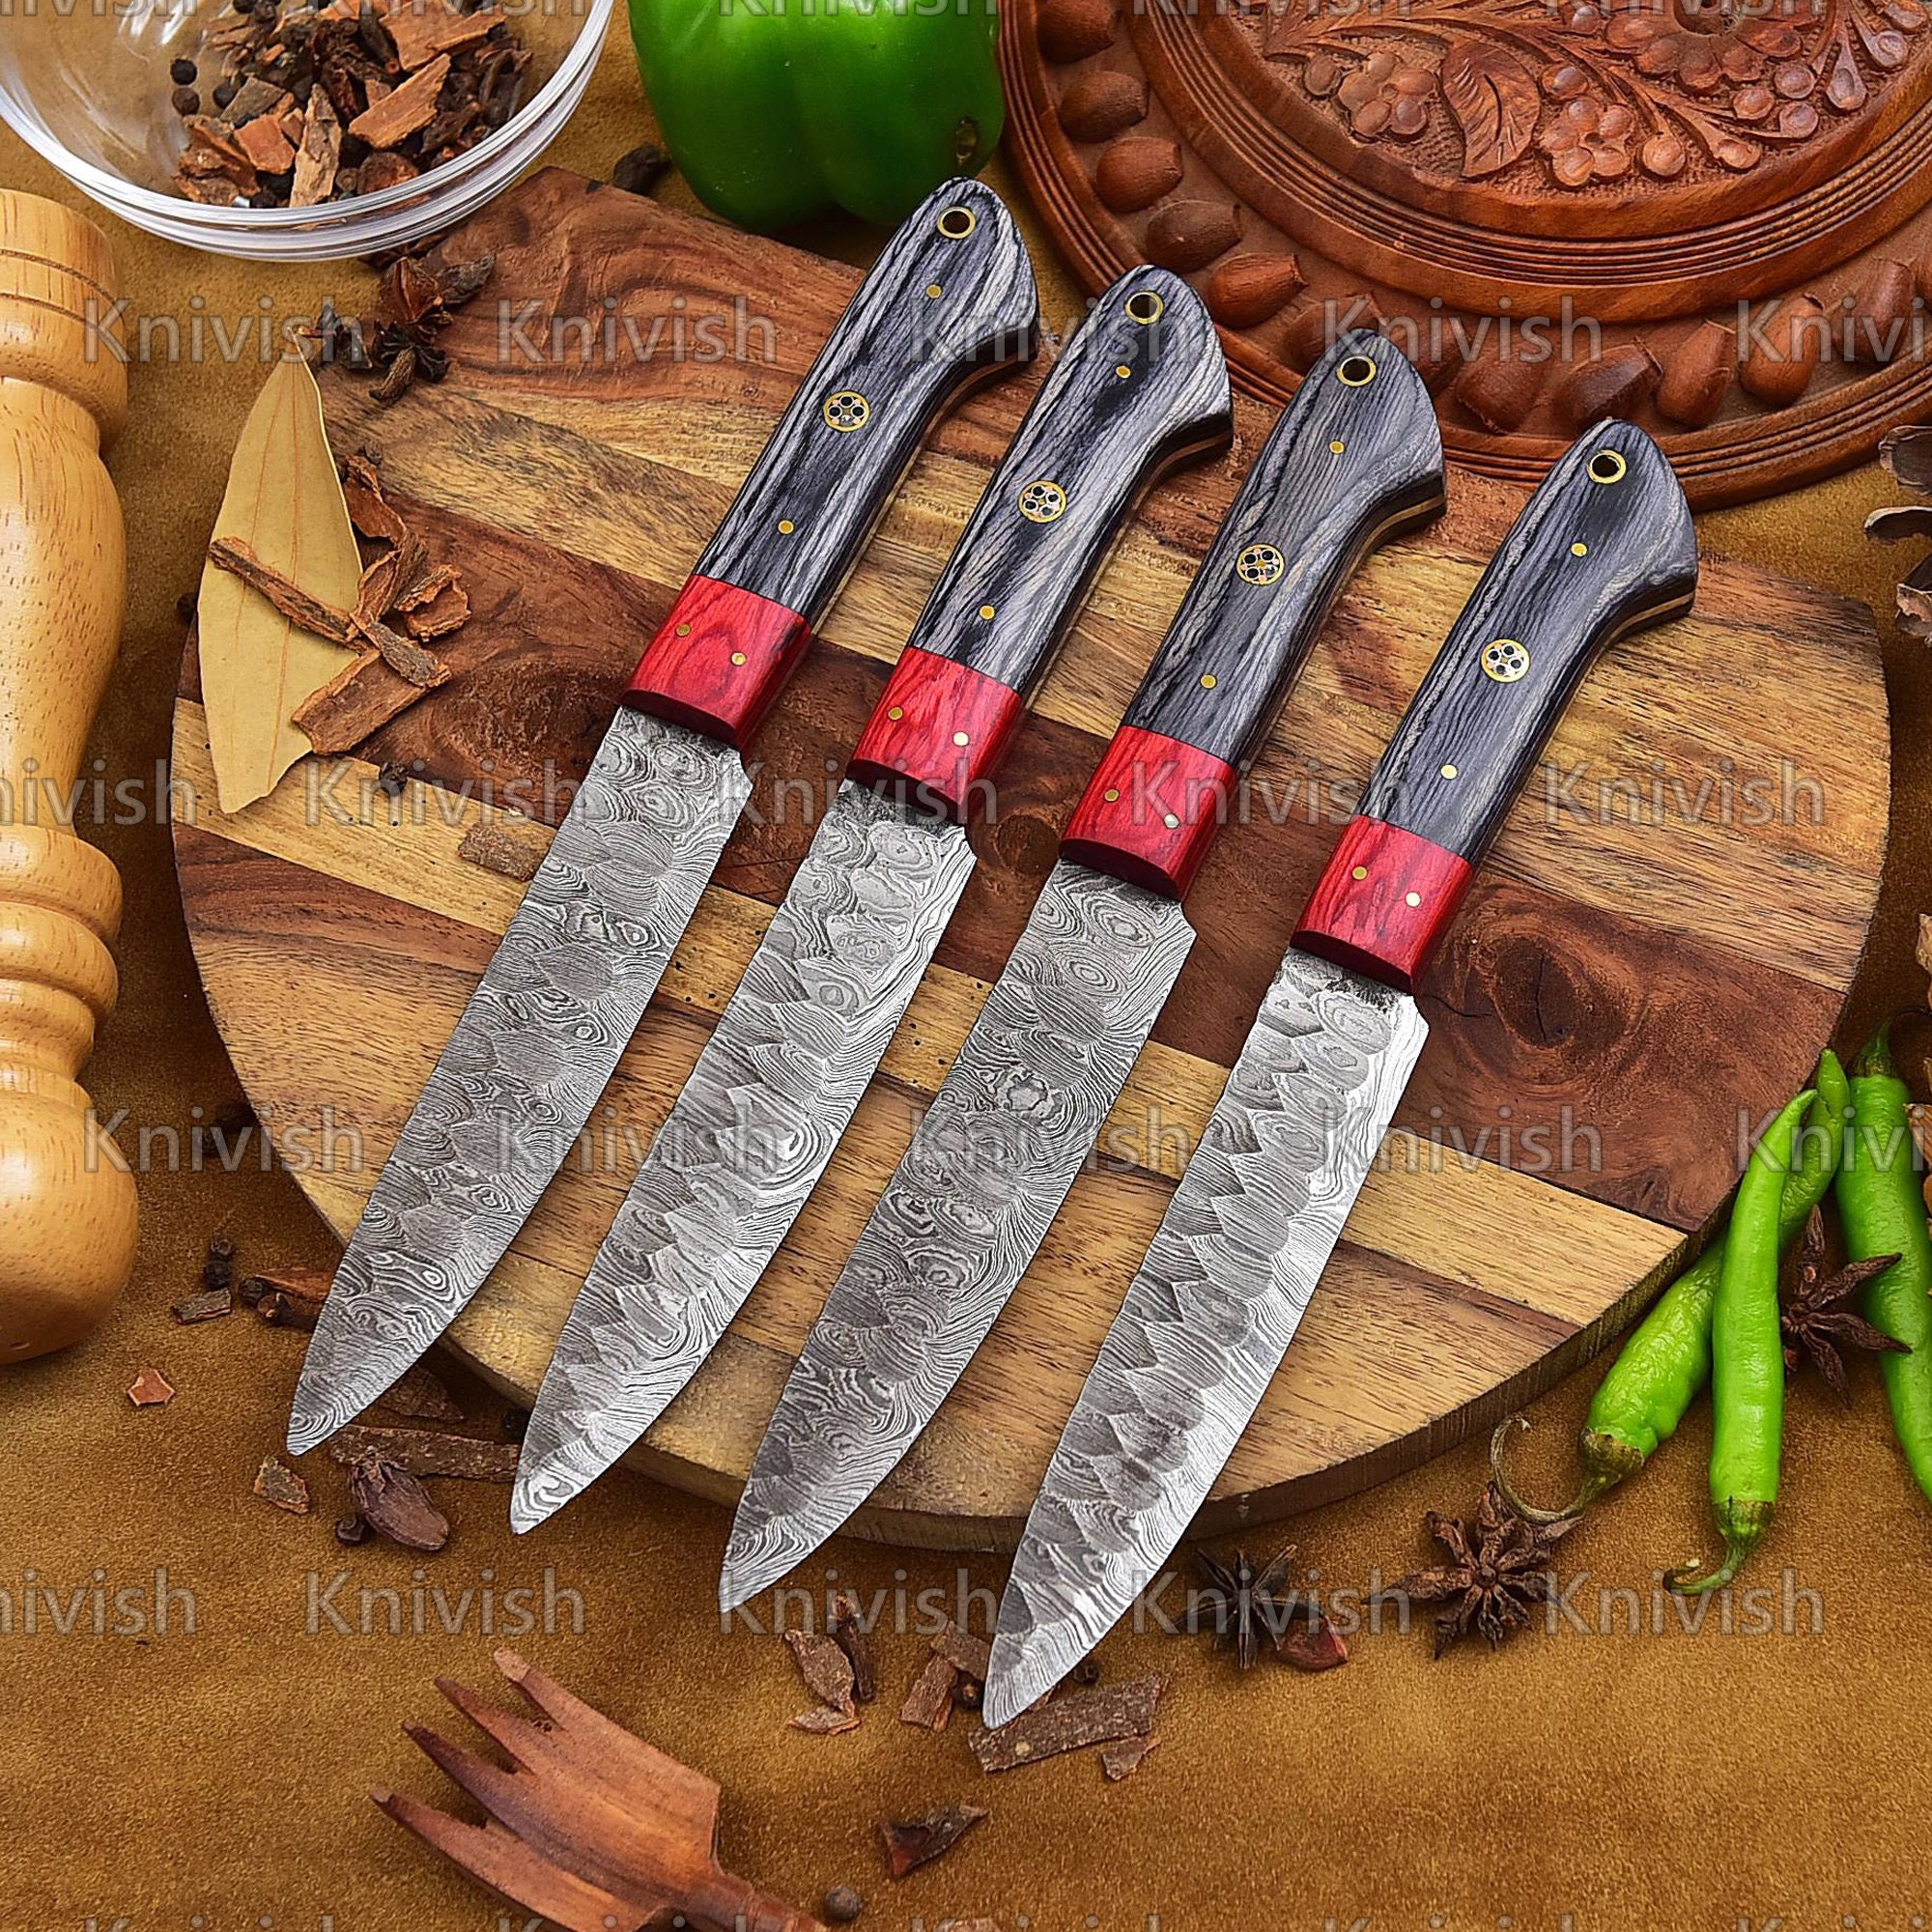 Kiwi Knife Cook Utility Knives Cutlery Steak Wood Handle Kitchen Tool Sharp  Blade 6.5 Stainless Steel 1 set (2 Pcs) (No.171,172)